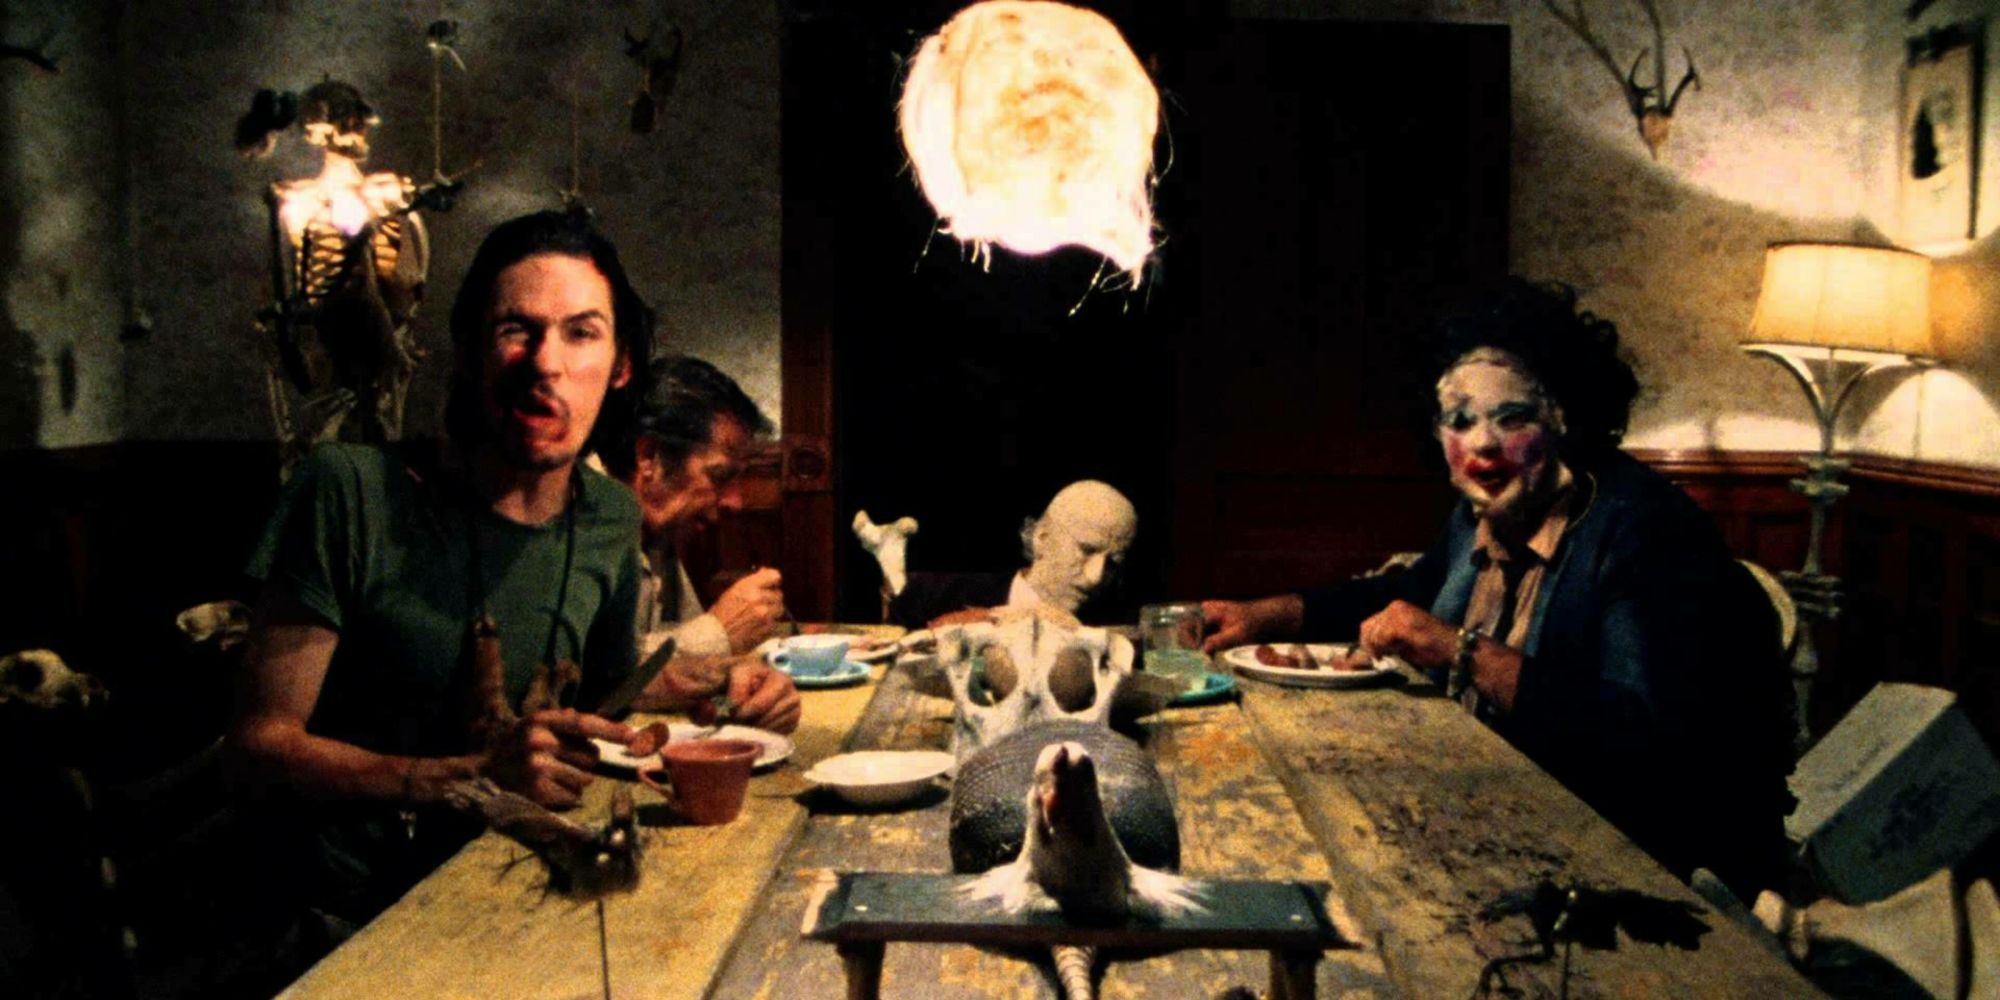 The dinner scene featuring Leatherface in The Texas Chain Saw Massacre